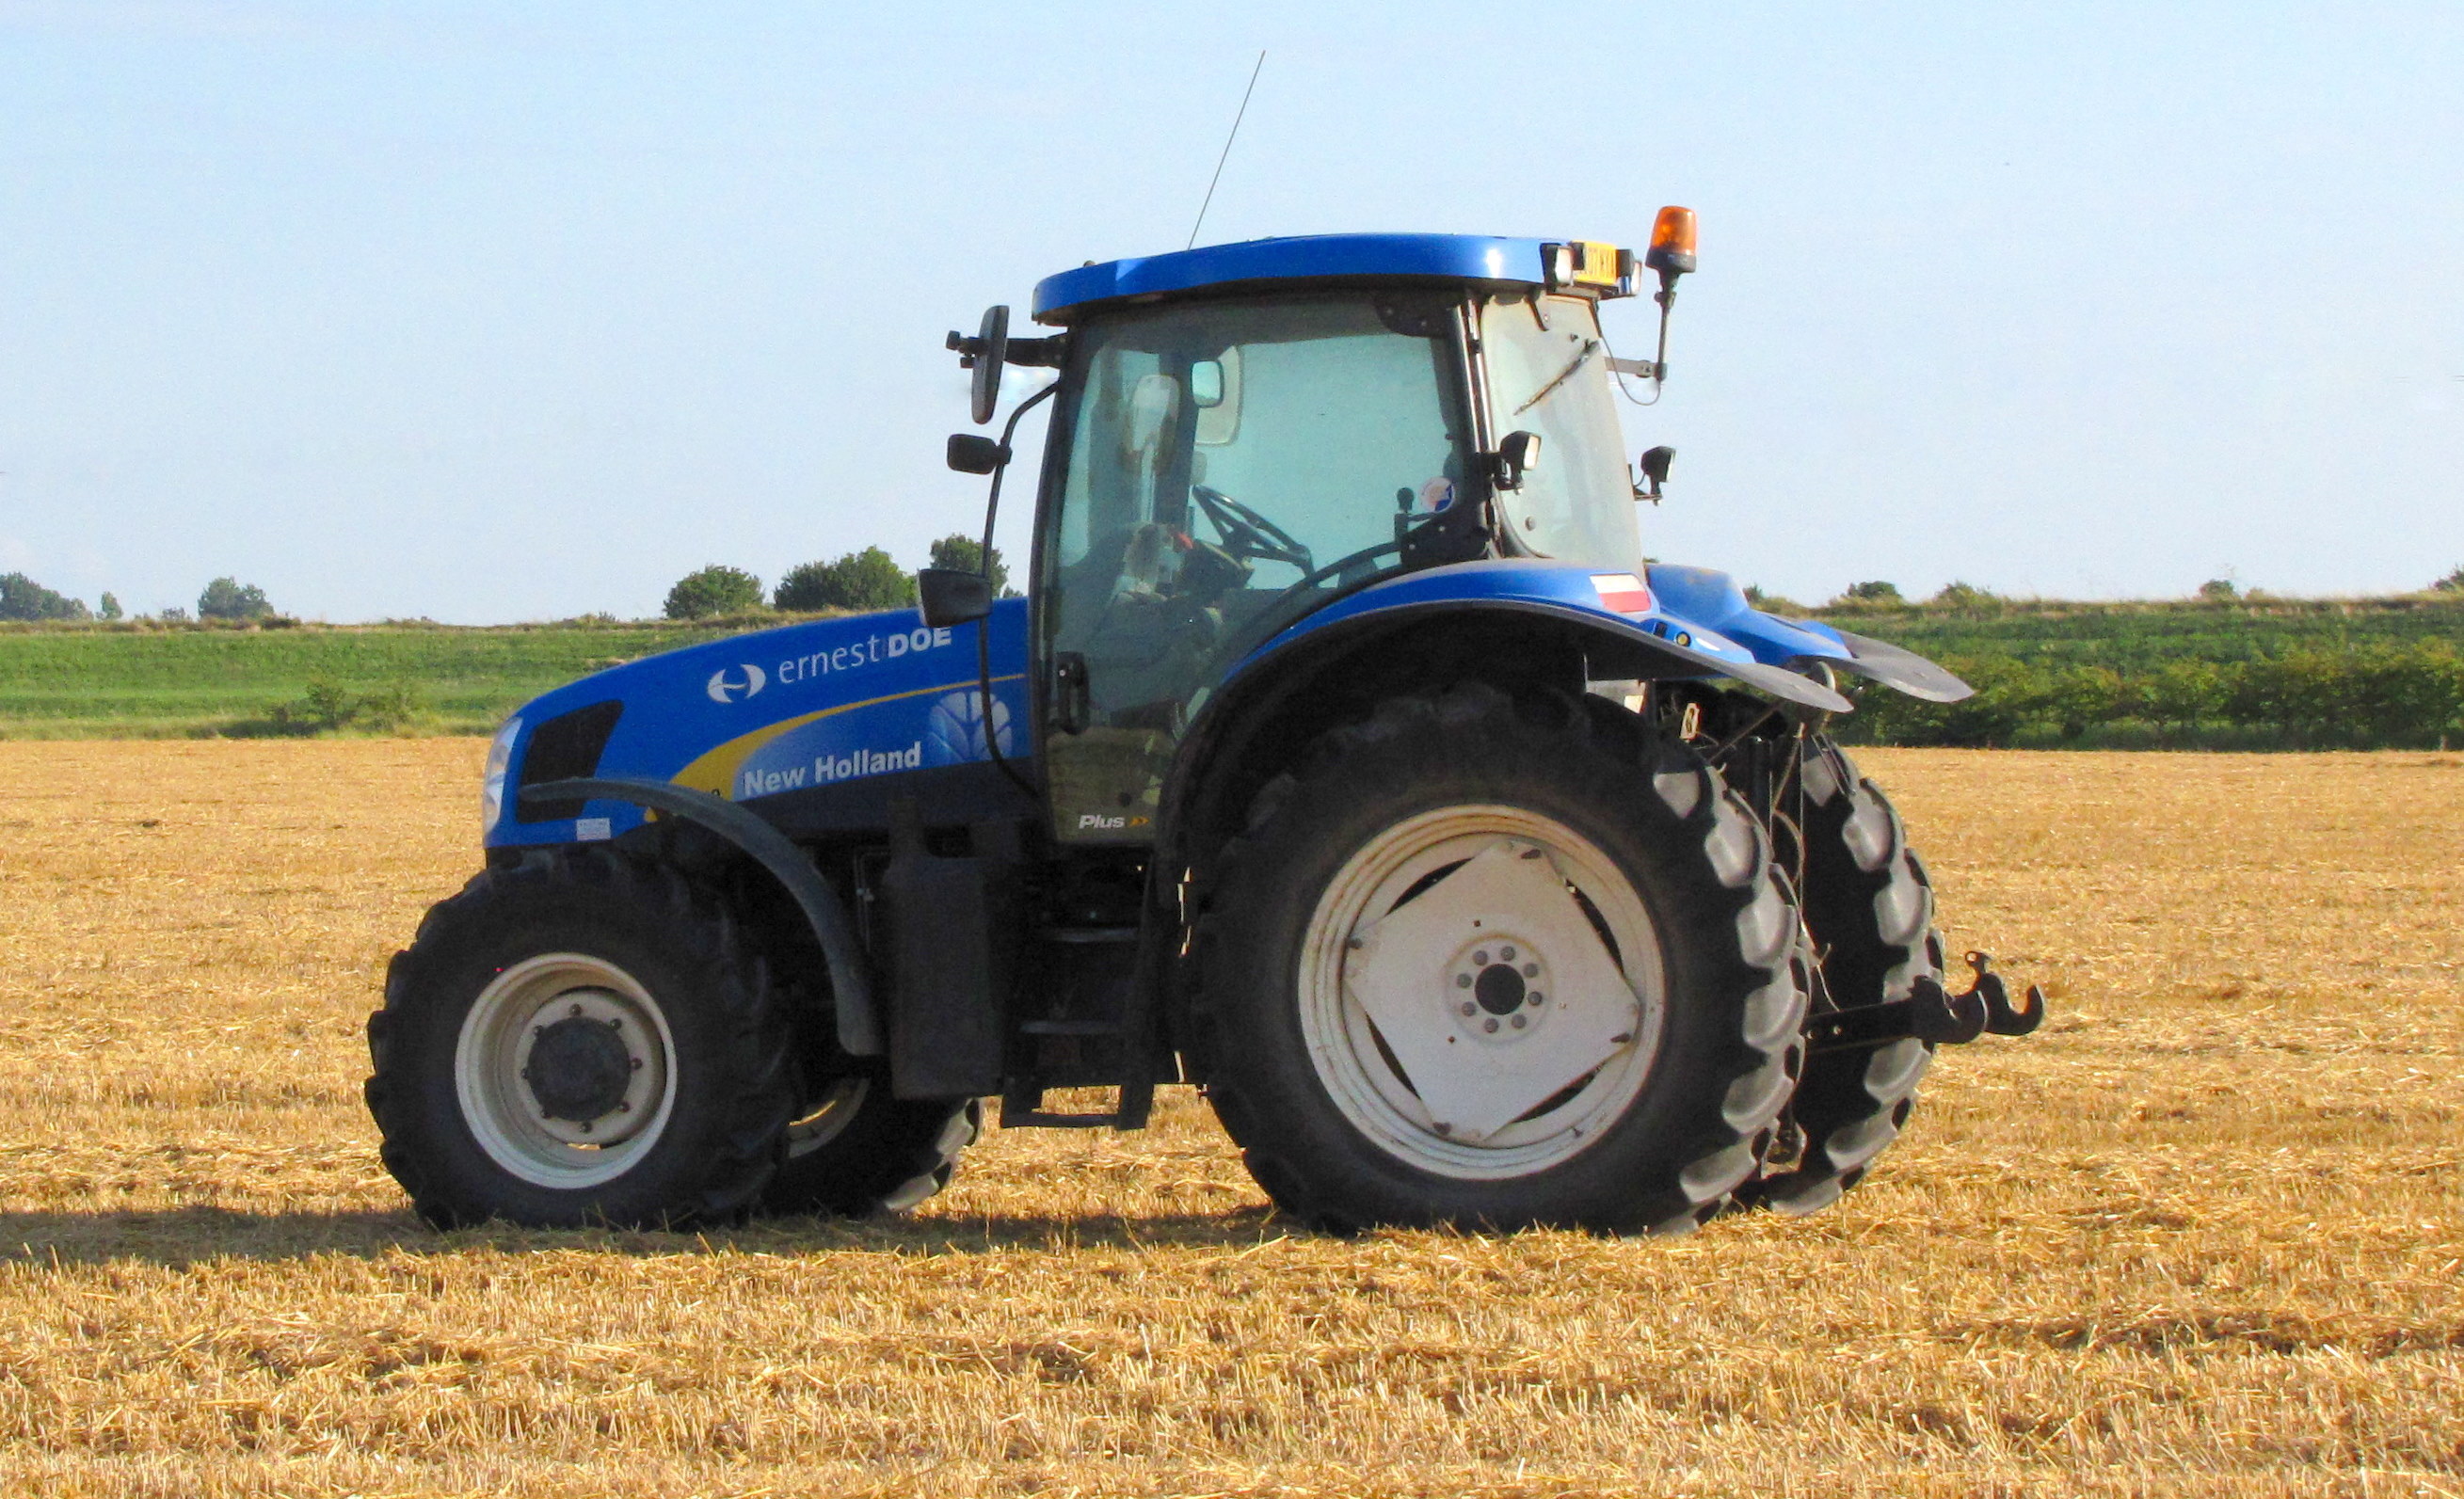 Nice wallpapers New Holland Tractor 2618x1593px